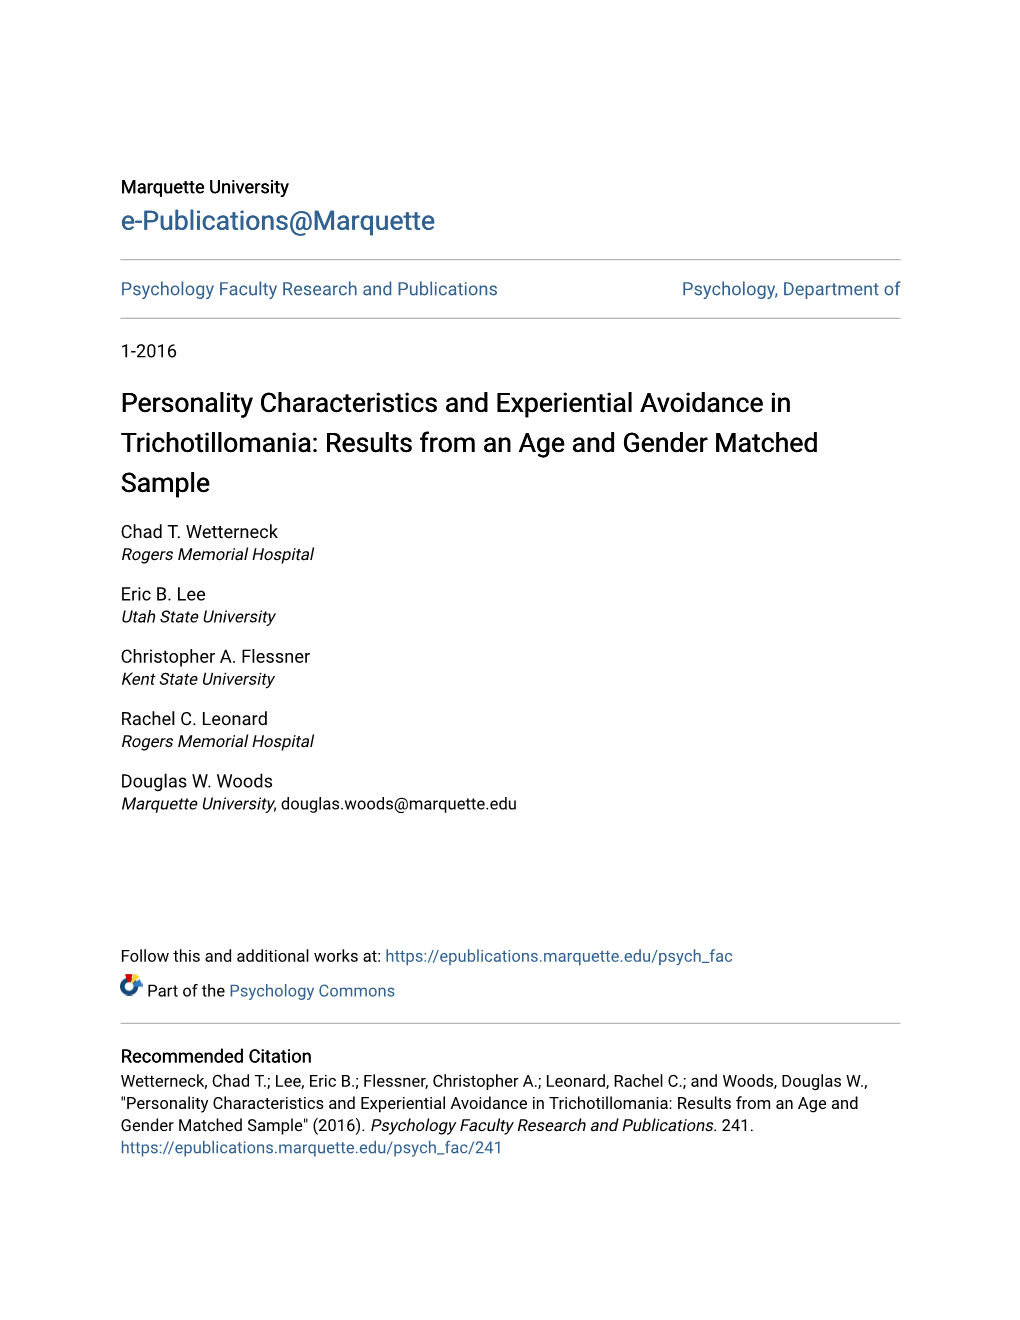 Personality Characteristics and Experiential Avoidance in Trichotillomania: Results from an Age and Gender Matched Sample